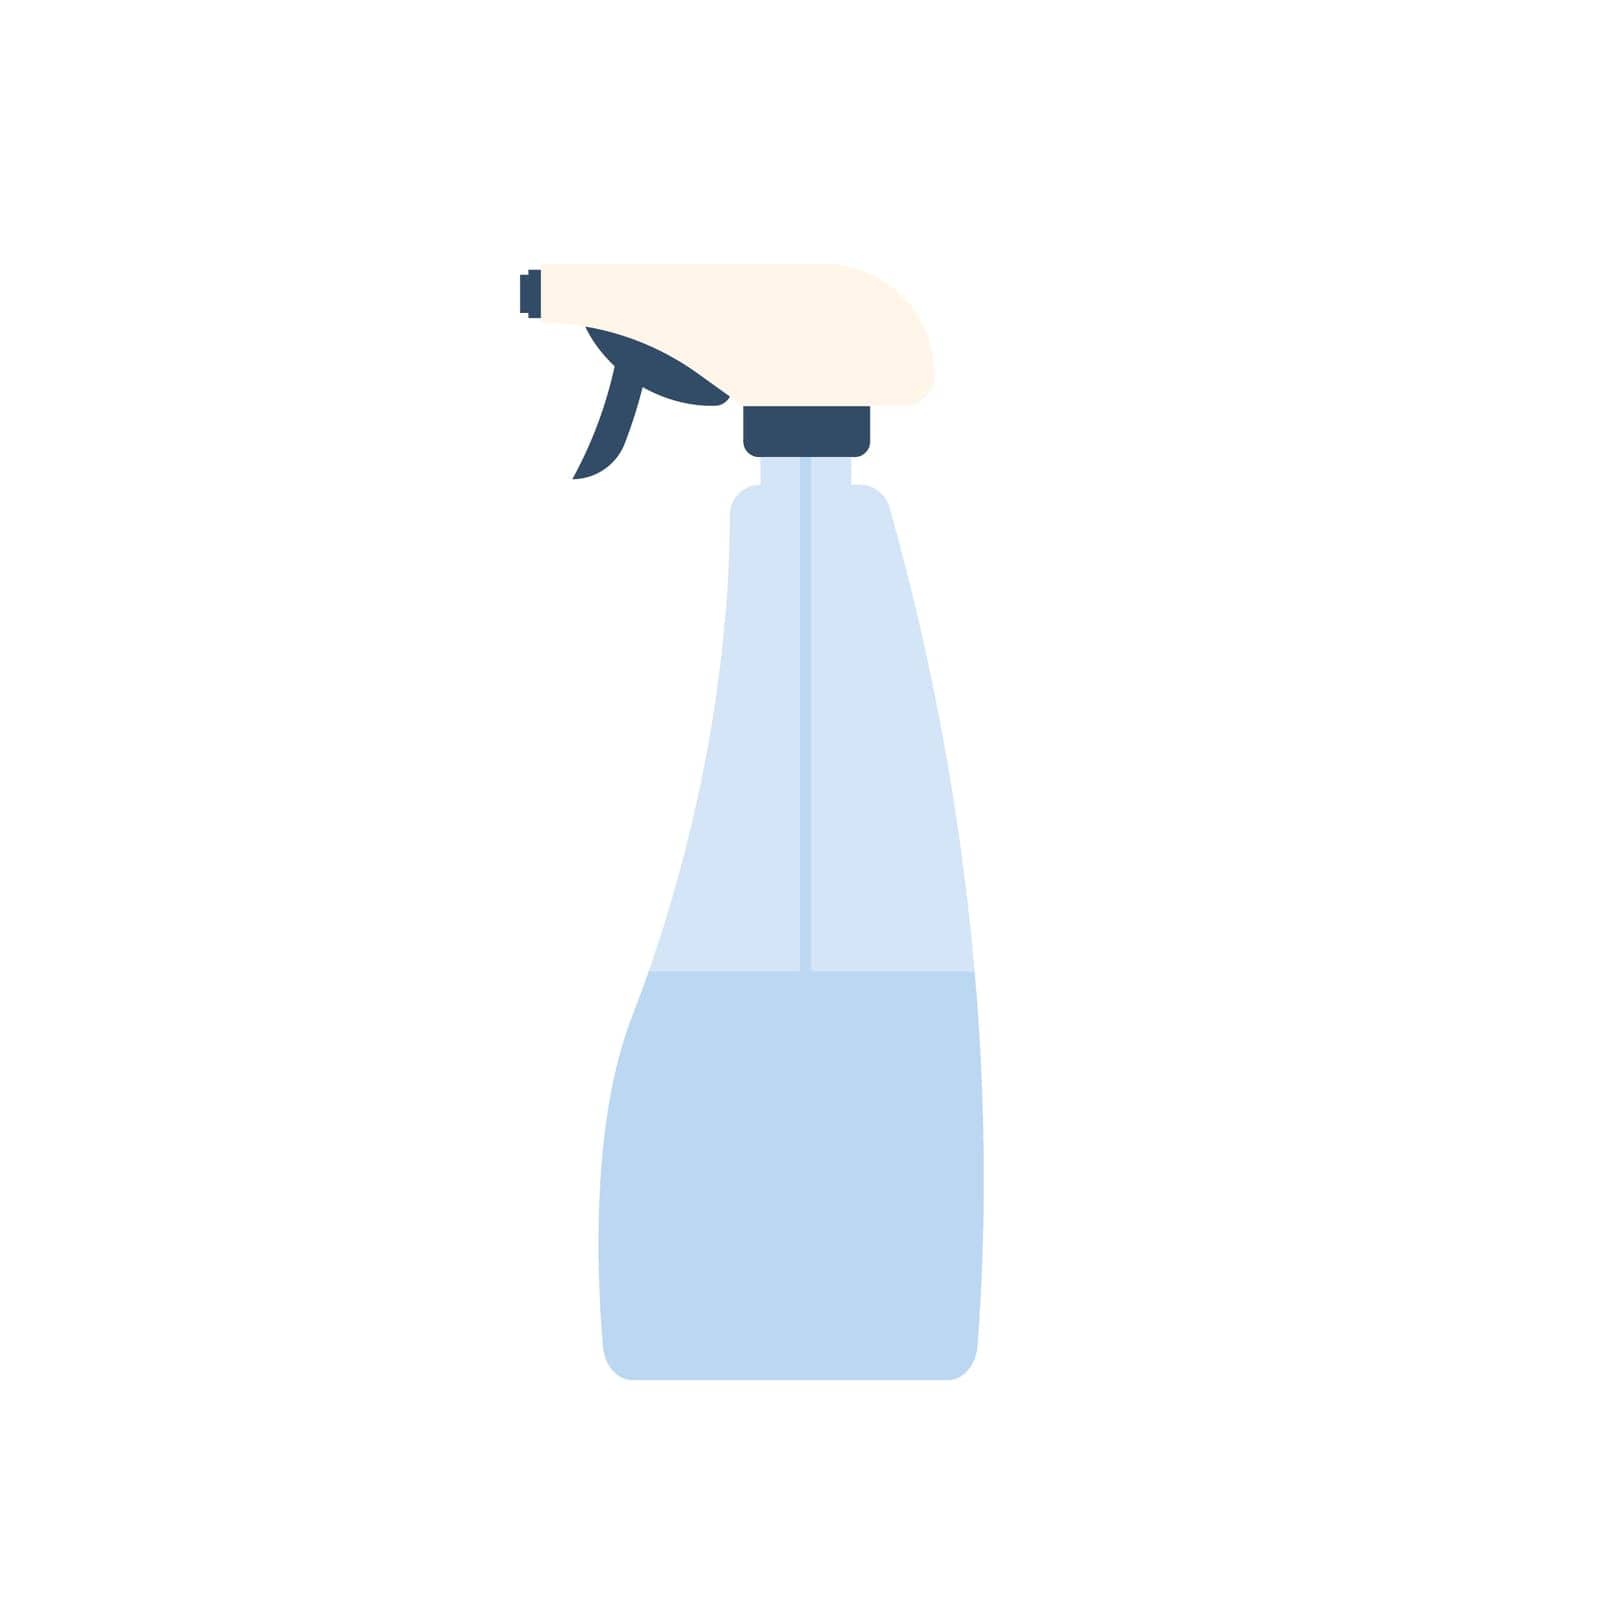 Cleaning windows spray bottle. House chores tools, housekeeping and brushing vector illustration